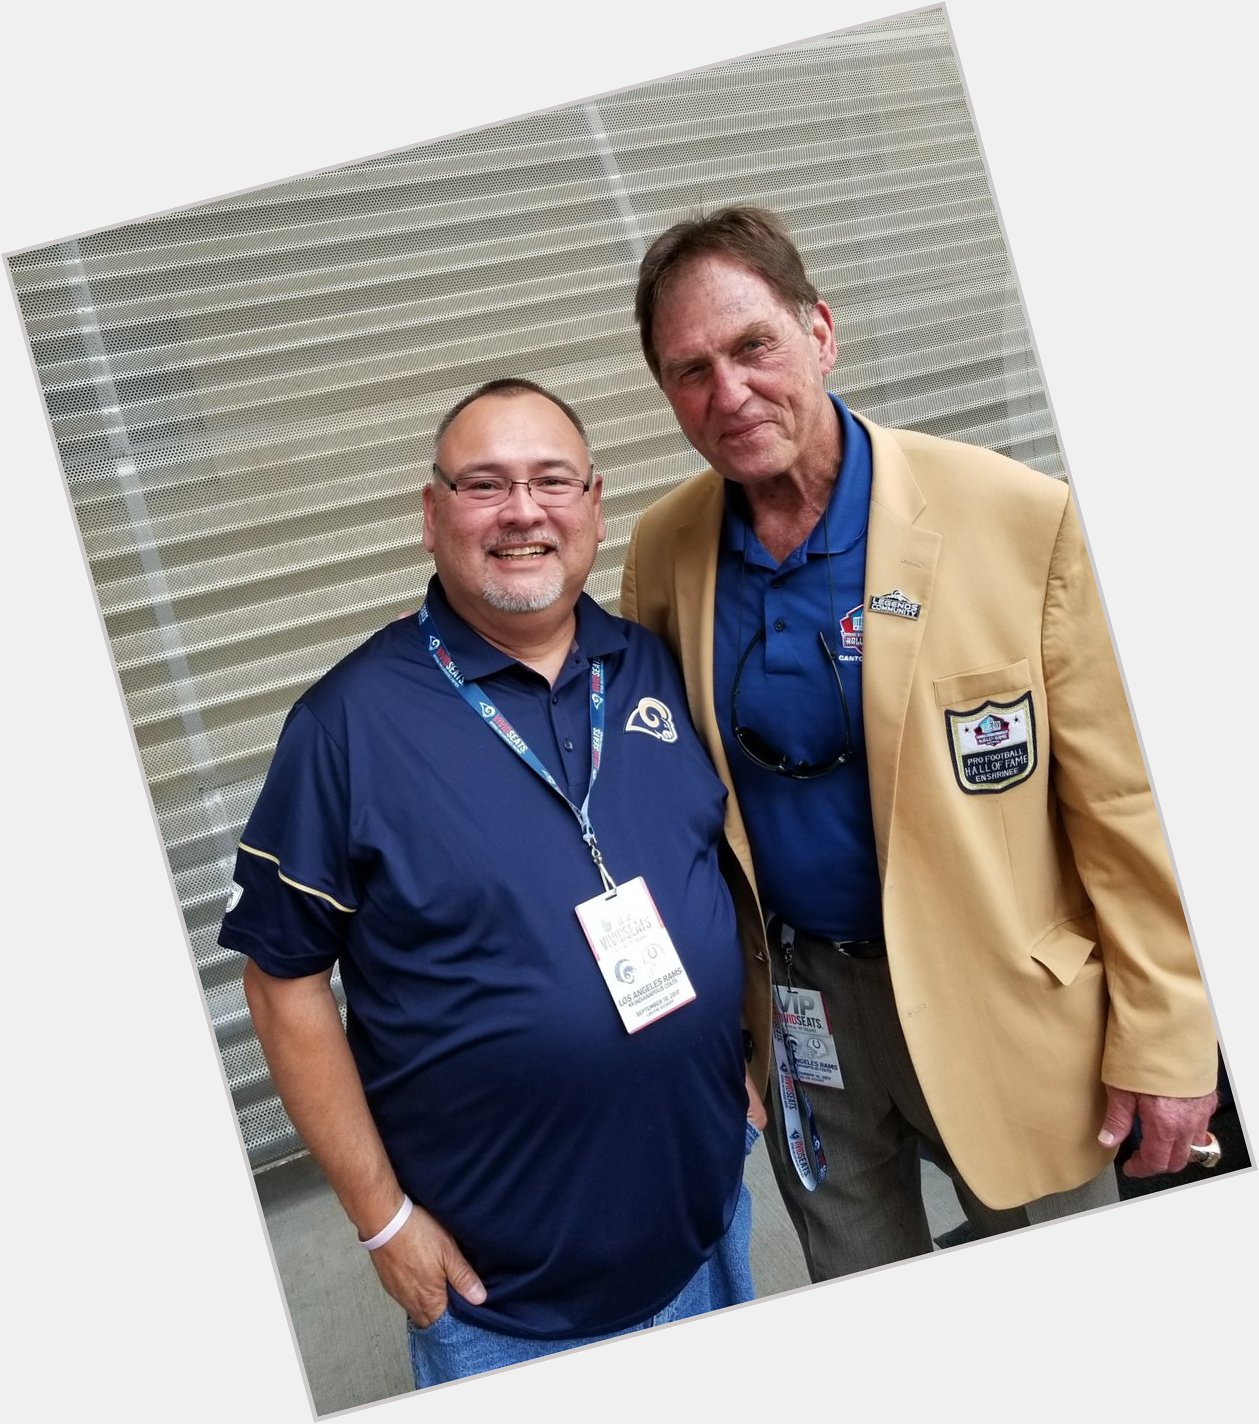 Happy Birthday to one of the best players ever, Jack Youngblood. 